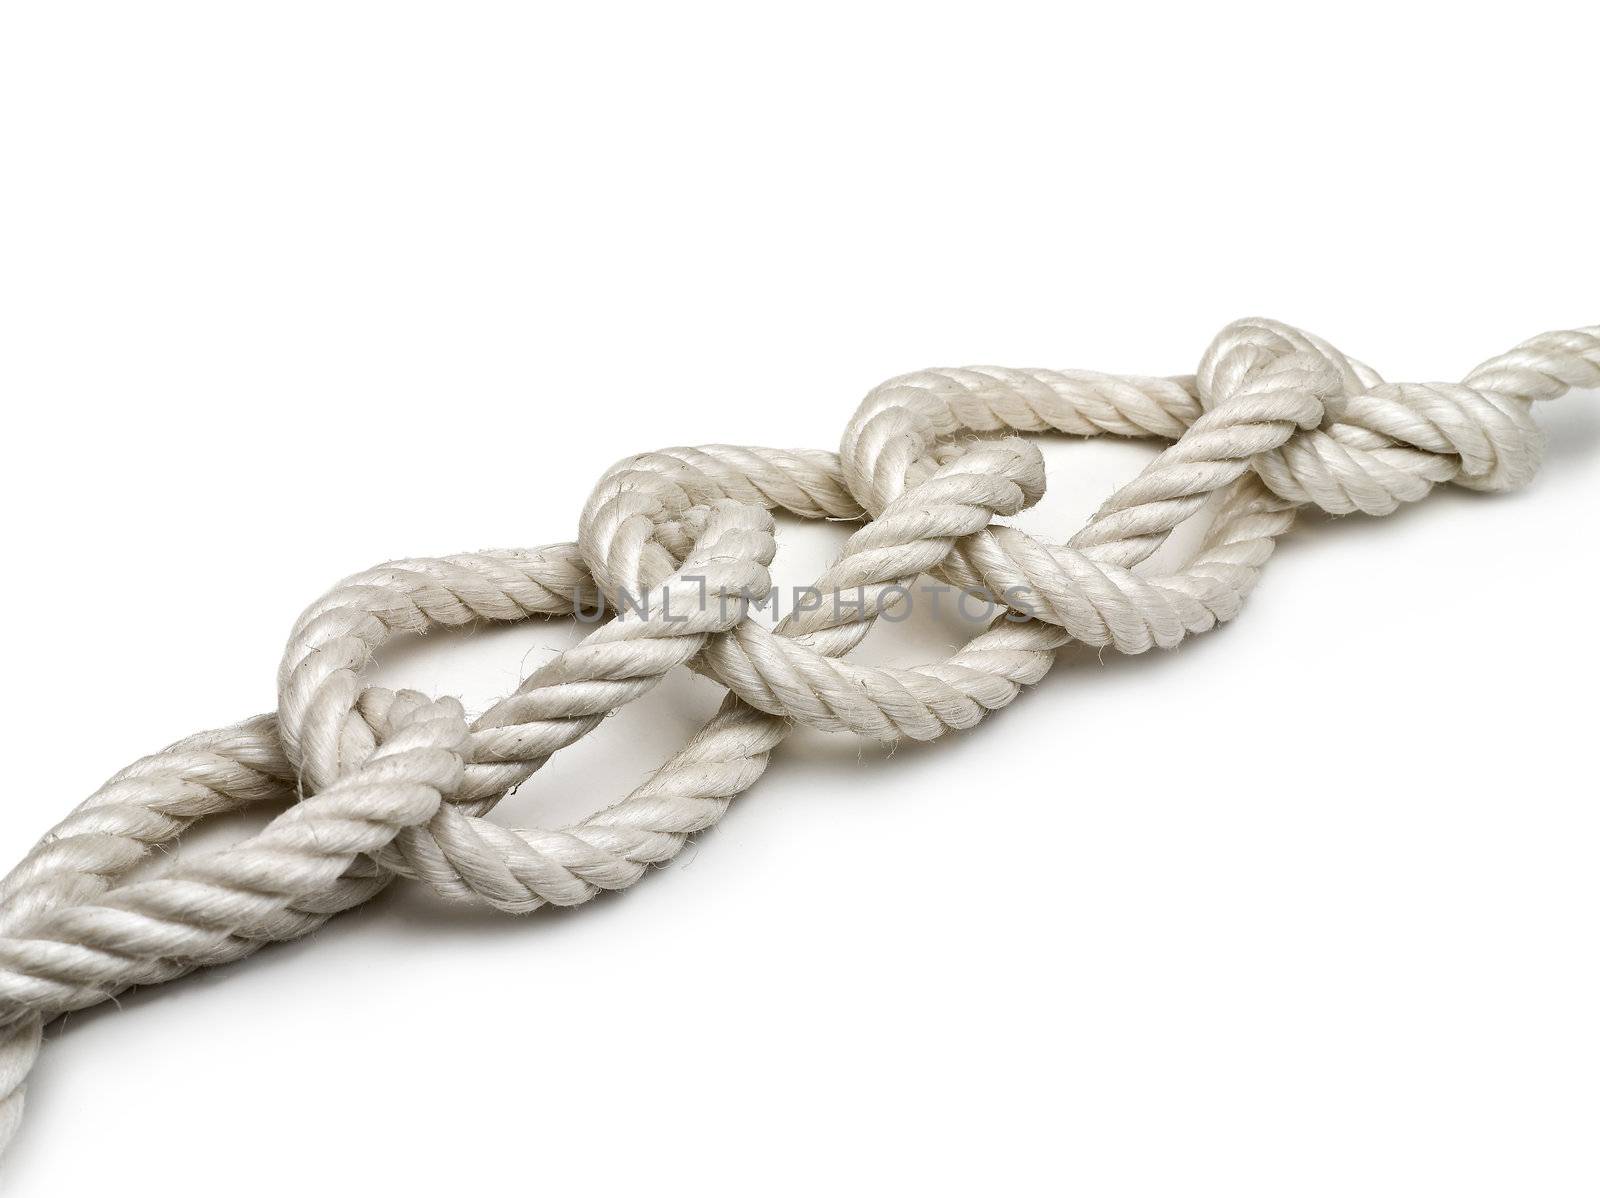 The knot in a rope. by pbombaert